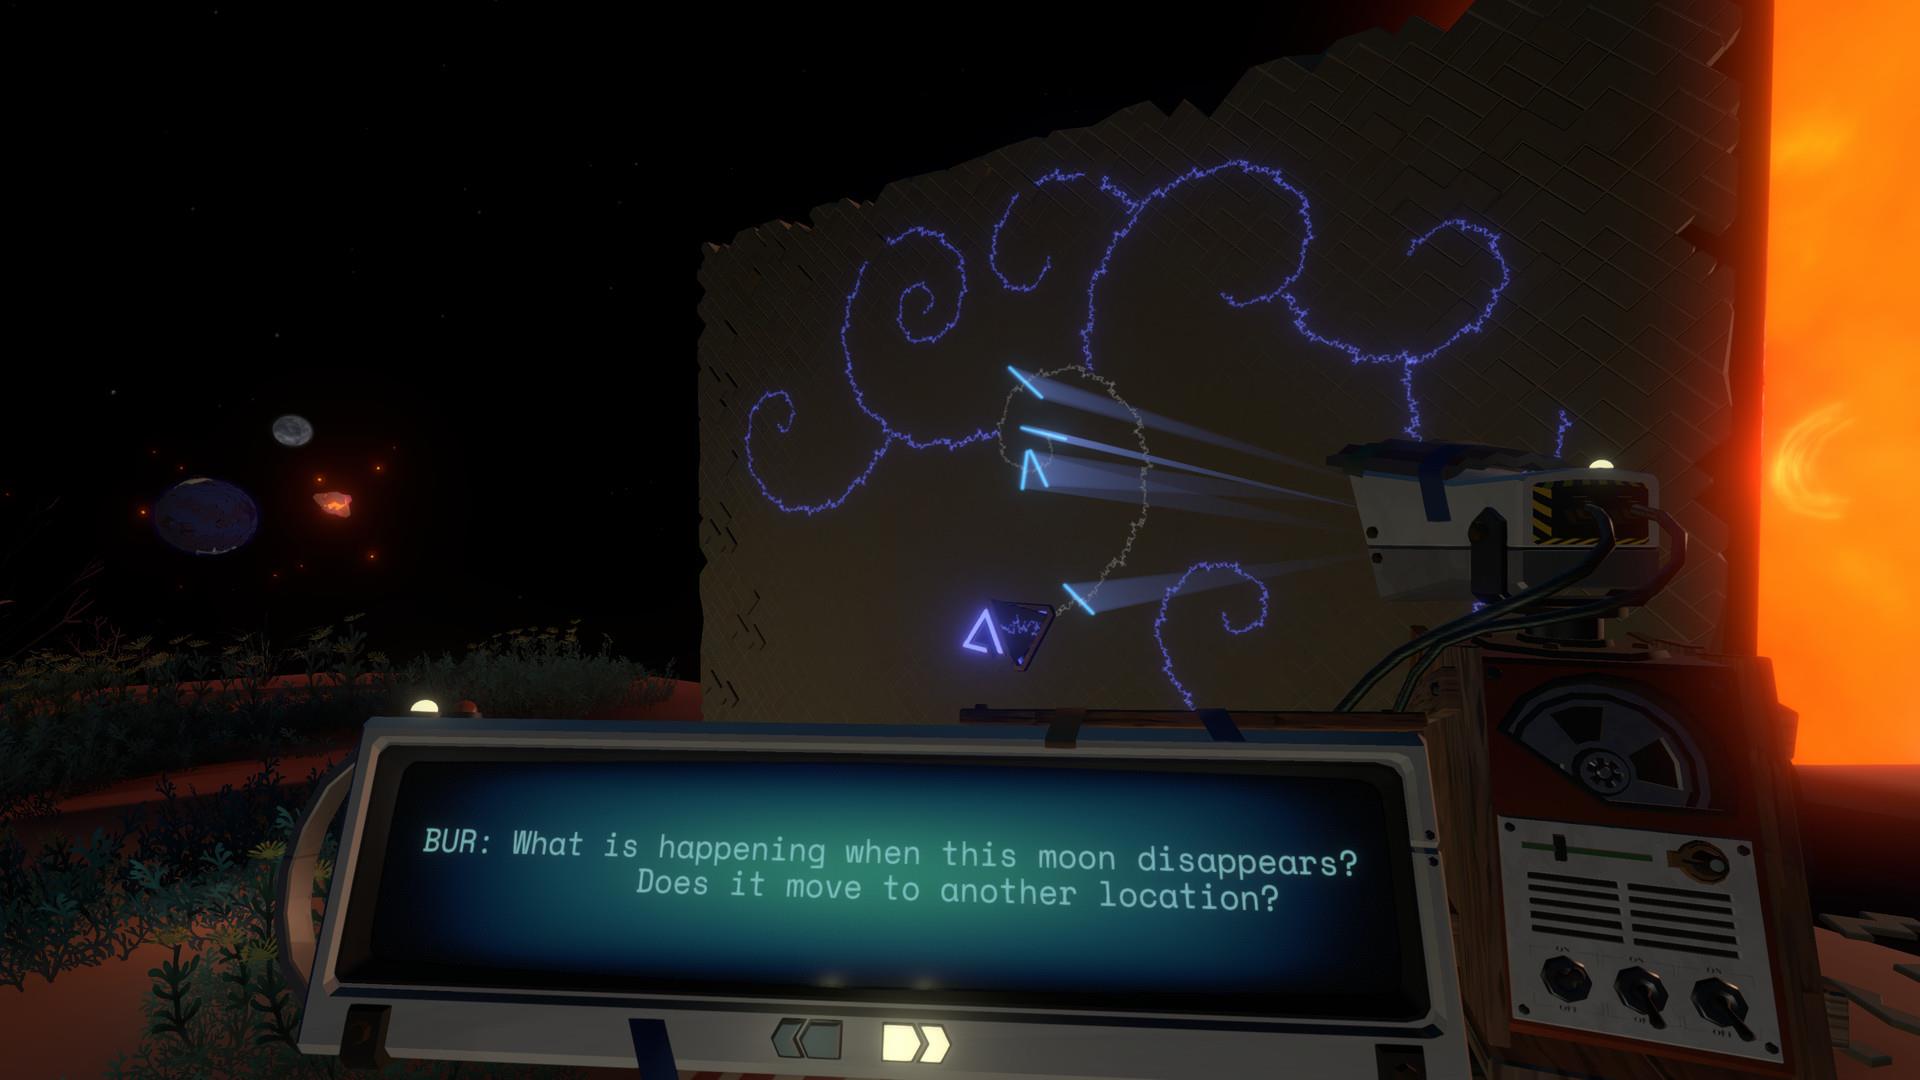 First-person space exploration game, Outer Wilds, is now timed